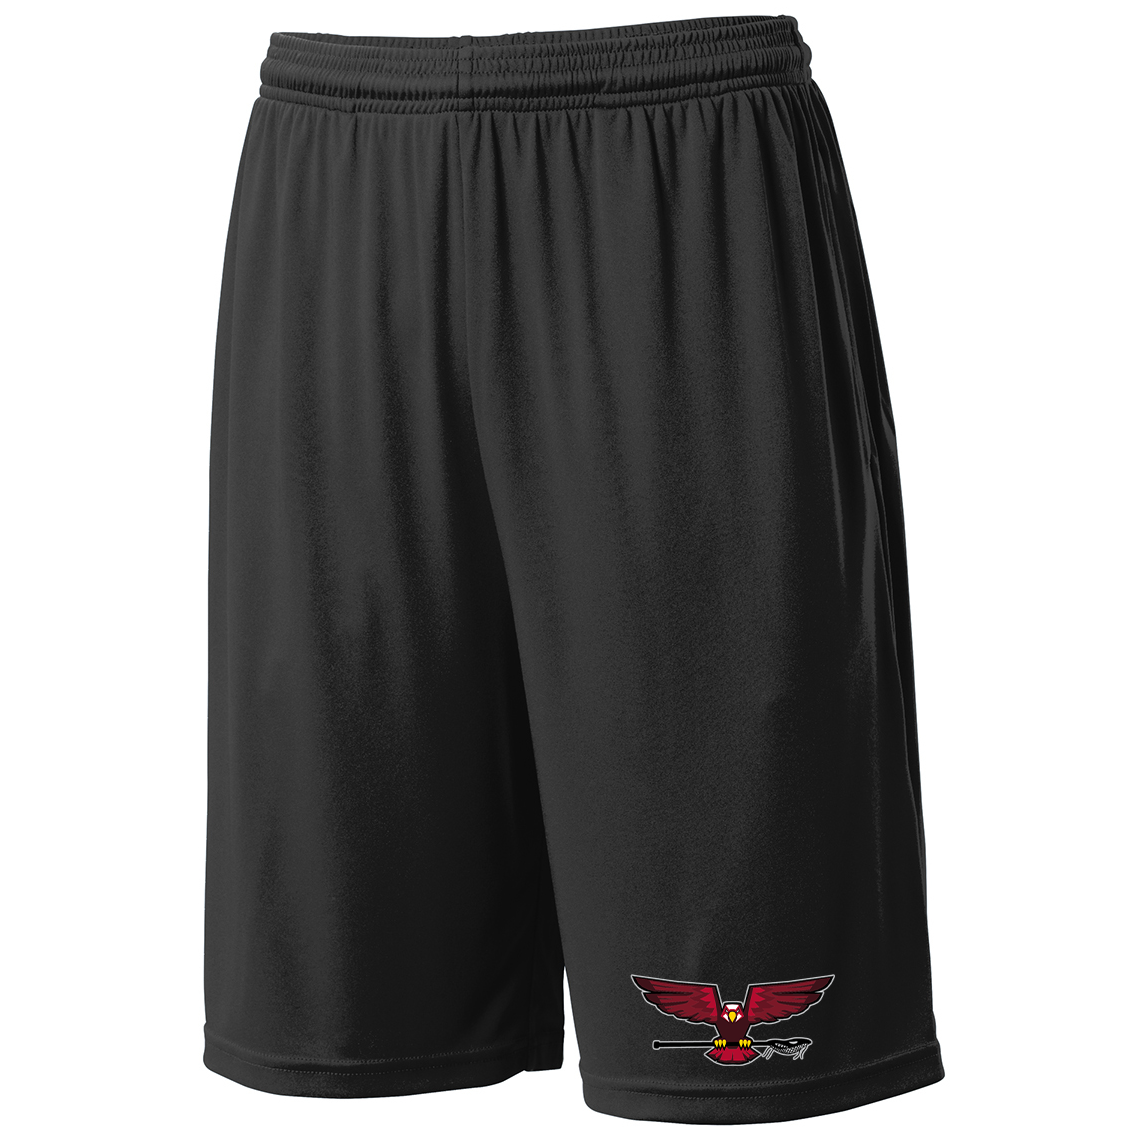 North Tapps Legacy Lacrosse Shorts